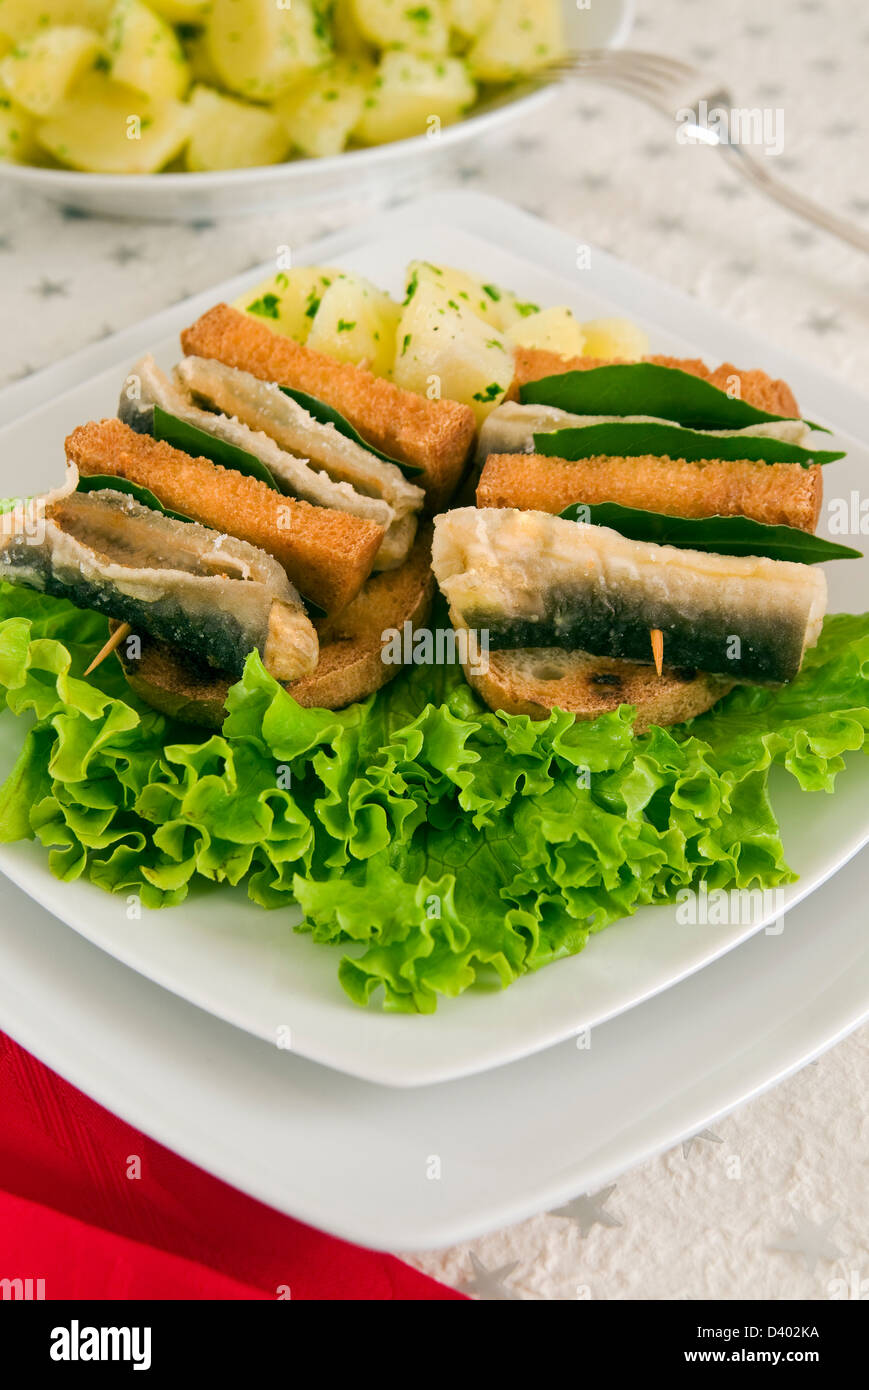 Skewers of fried eel and fried bread, and parsely potatoes on a lettuce bed, Christmas food, Italy, Italian cooking Stock Photo